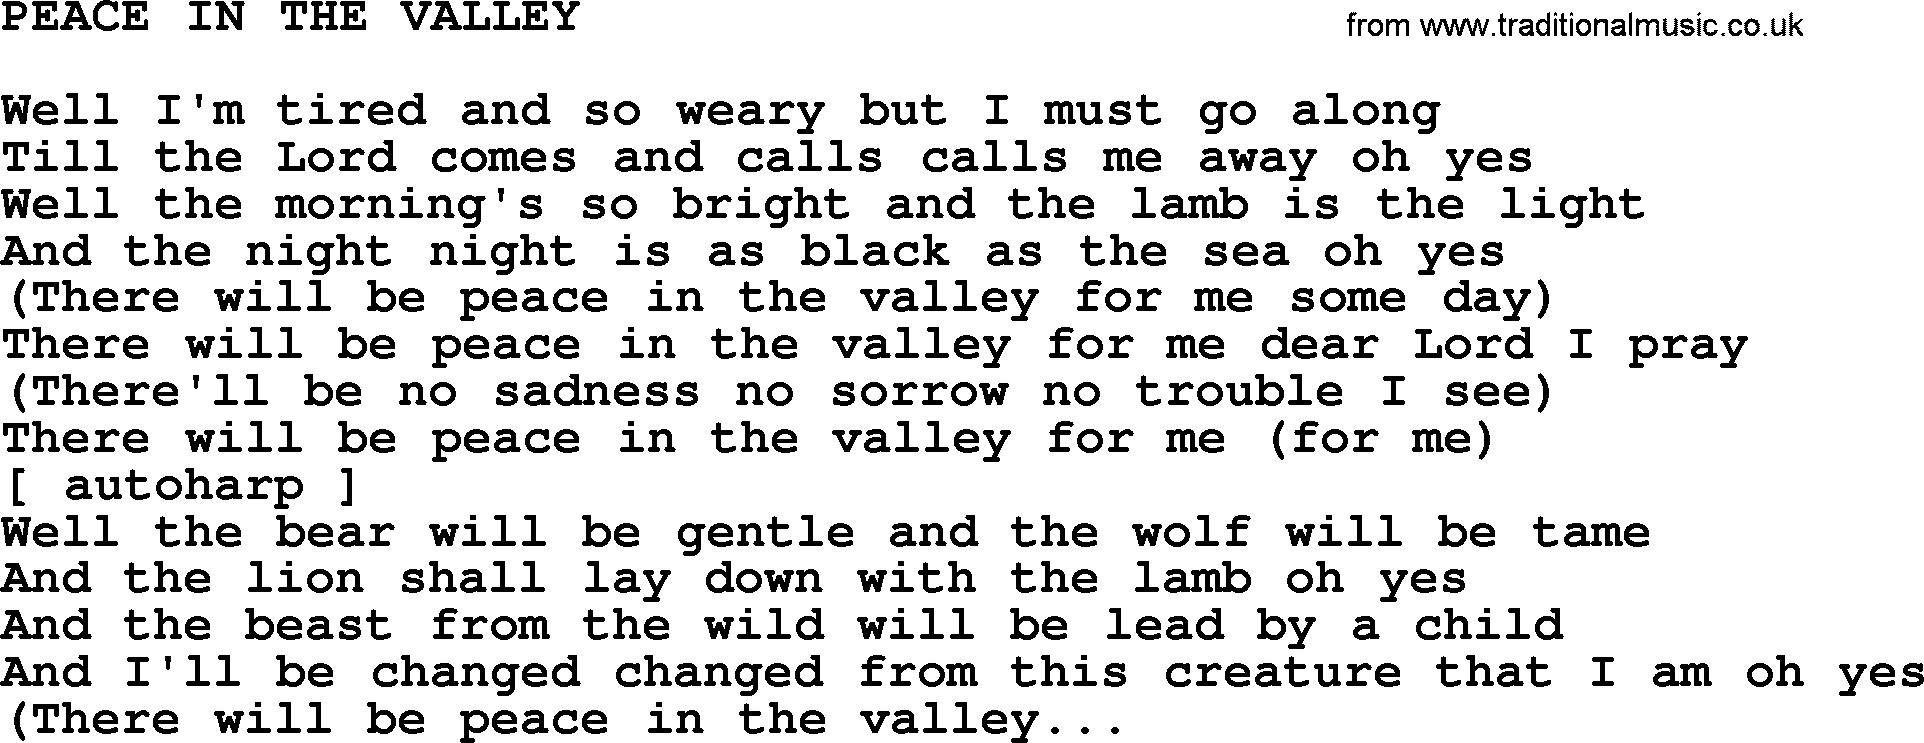 Johnny Cash song Peace In The Valley.txt lyrics